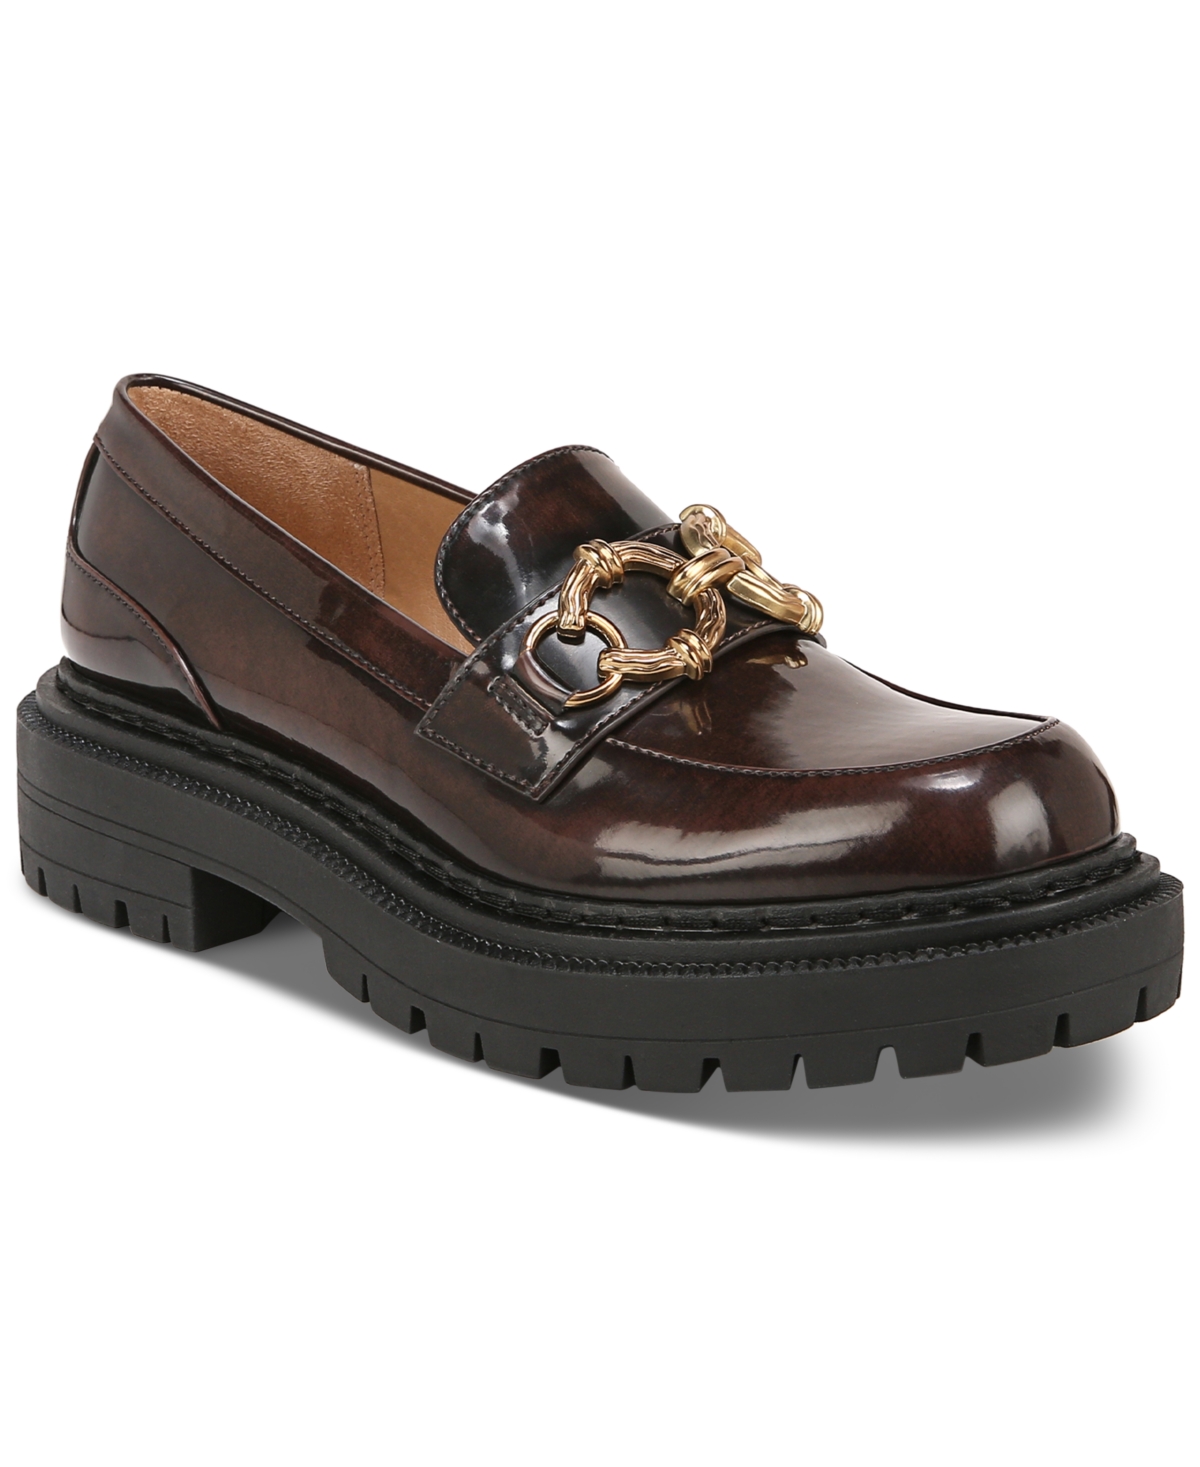 Circus Ny Women's Ella Lug Sole Tailored Chain Platform Lug Sole Loafers In Chestnut Box Patent